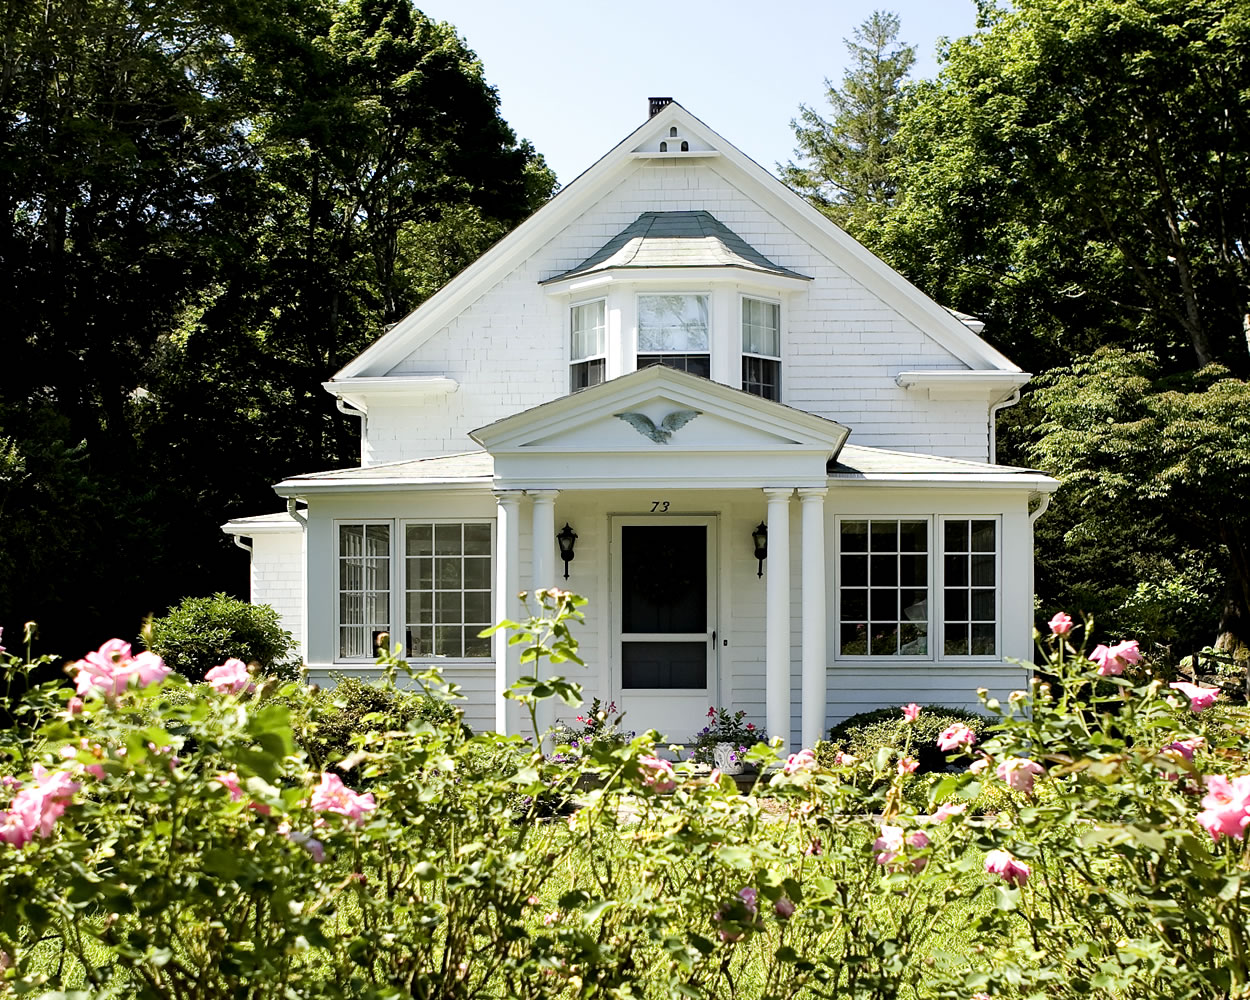 Rogers & Marney | Cape Cod's Green Built Homes